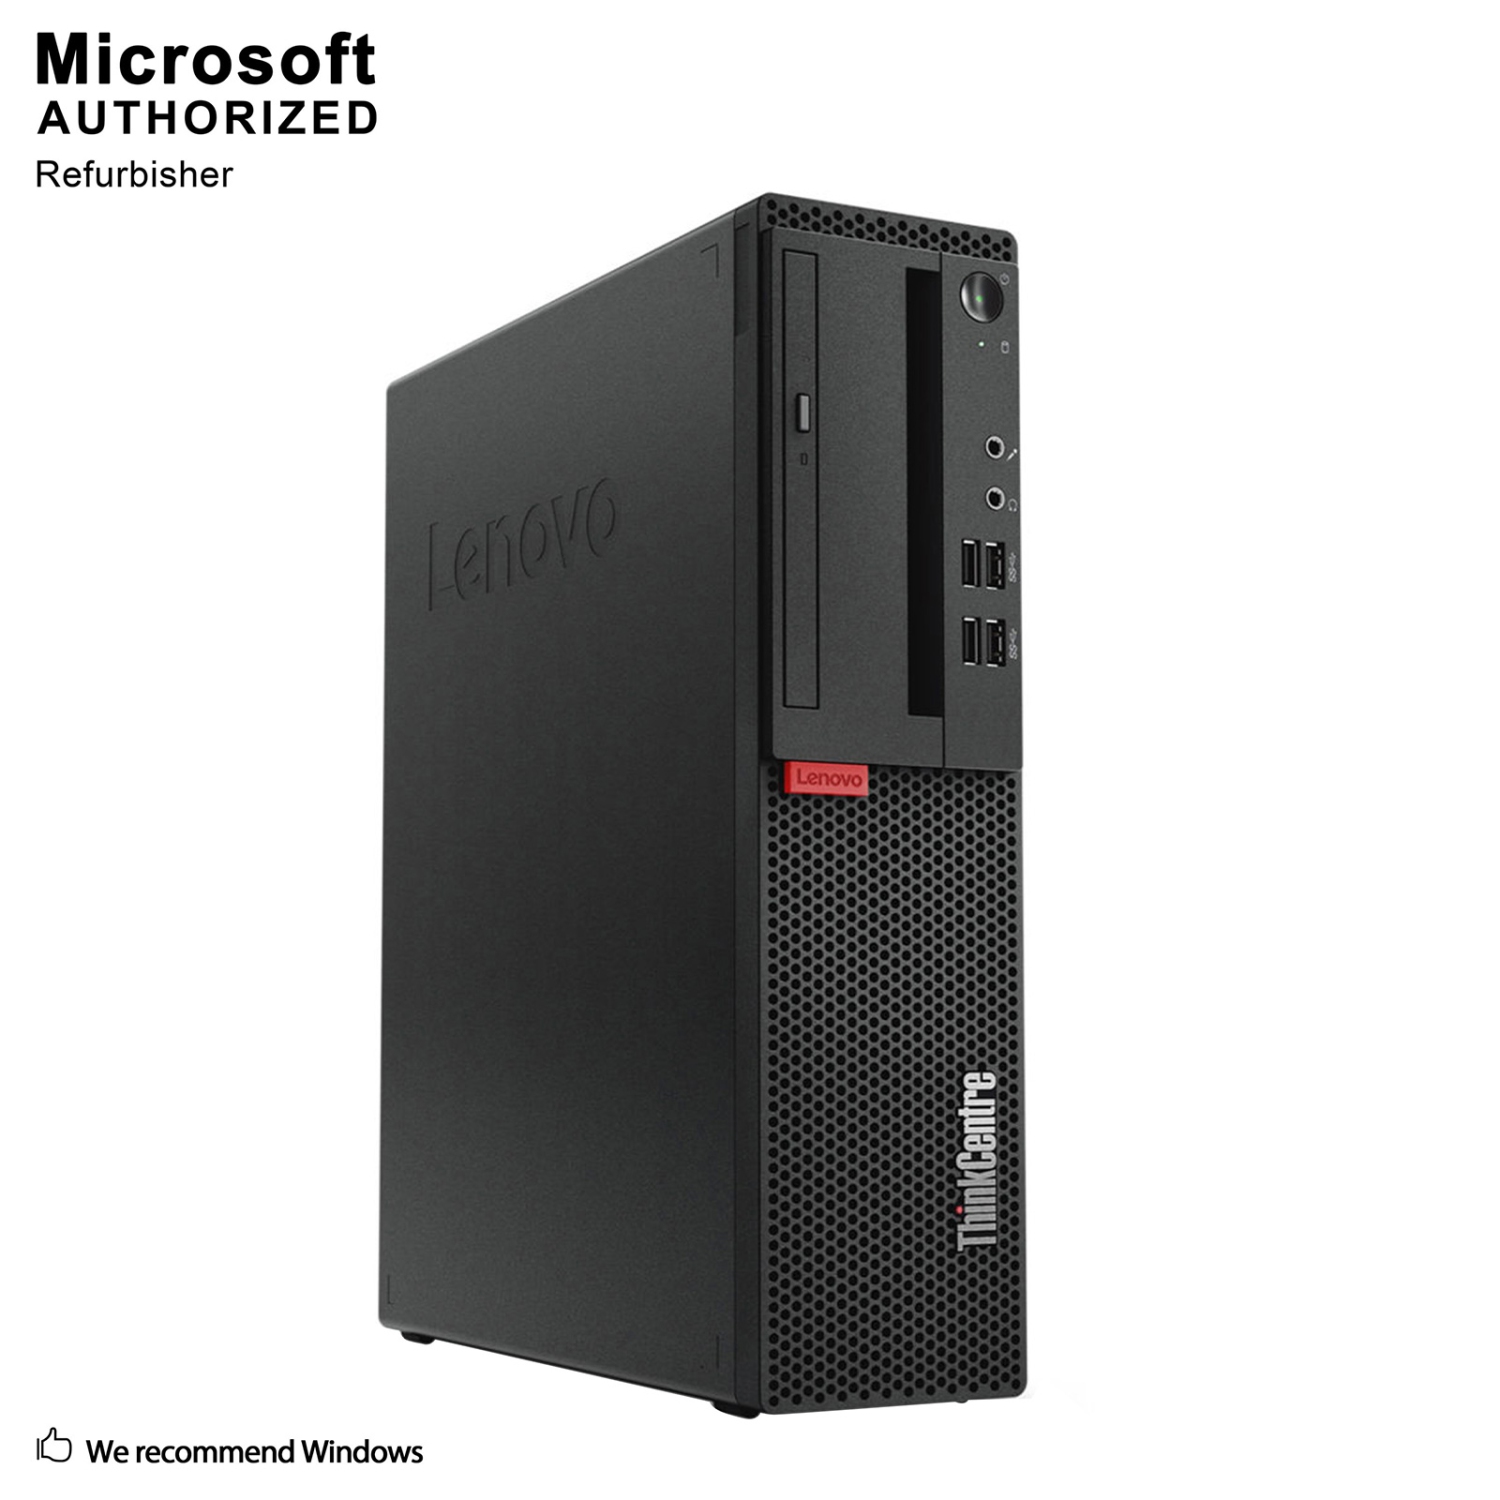 Refurbished (Good) - Lenovo ThinkCentre M910S SFF PC, Intel Core I5-6500 3.2Ghz, 16G DDR4, 512 GB SSD, DVD, 4K Support, Keyboard & Mouse, Win 10 Pro 64-bit (EN/ES/FR)